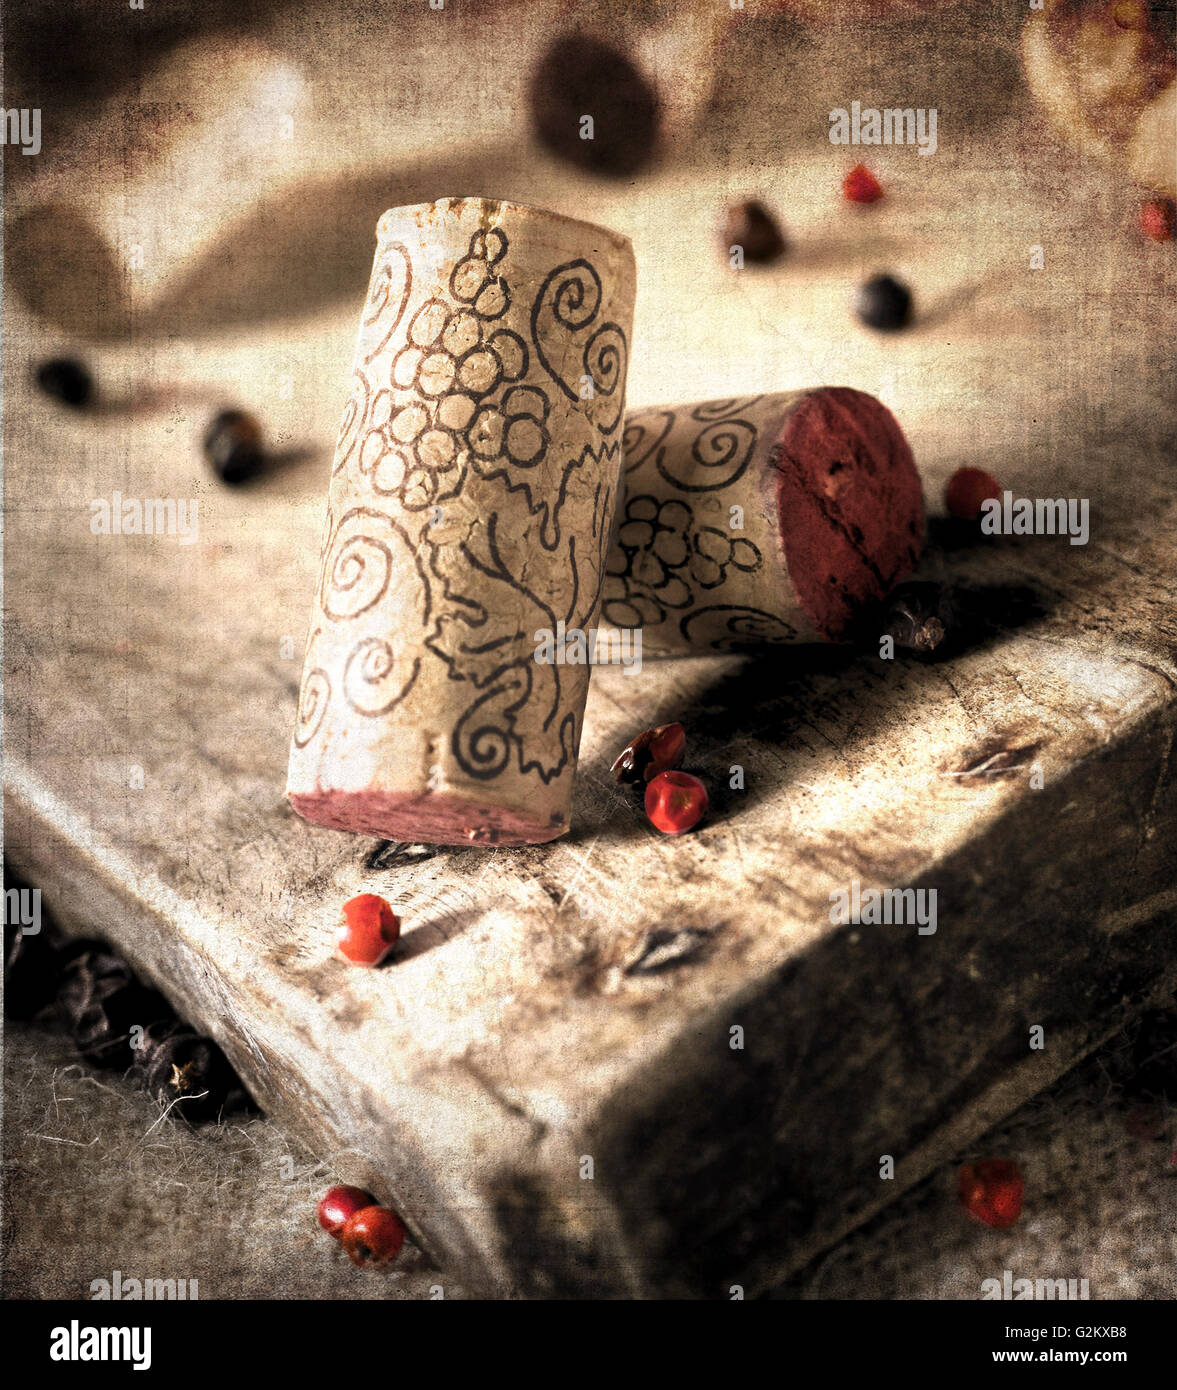 Wine Corks on Cutting Board Banque D'Images